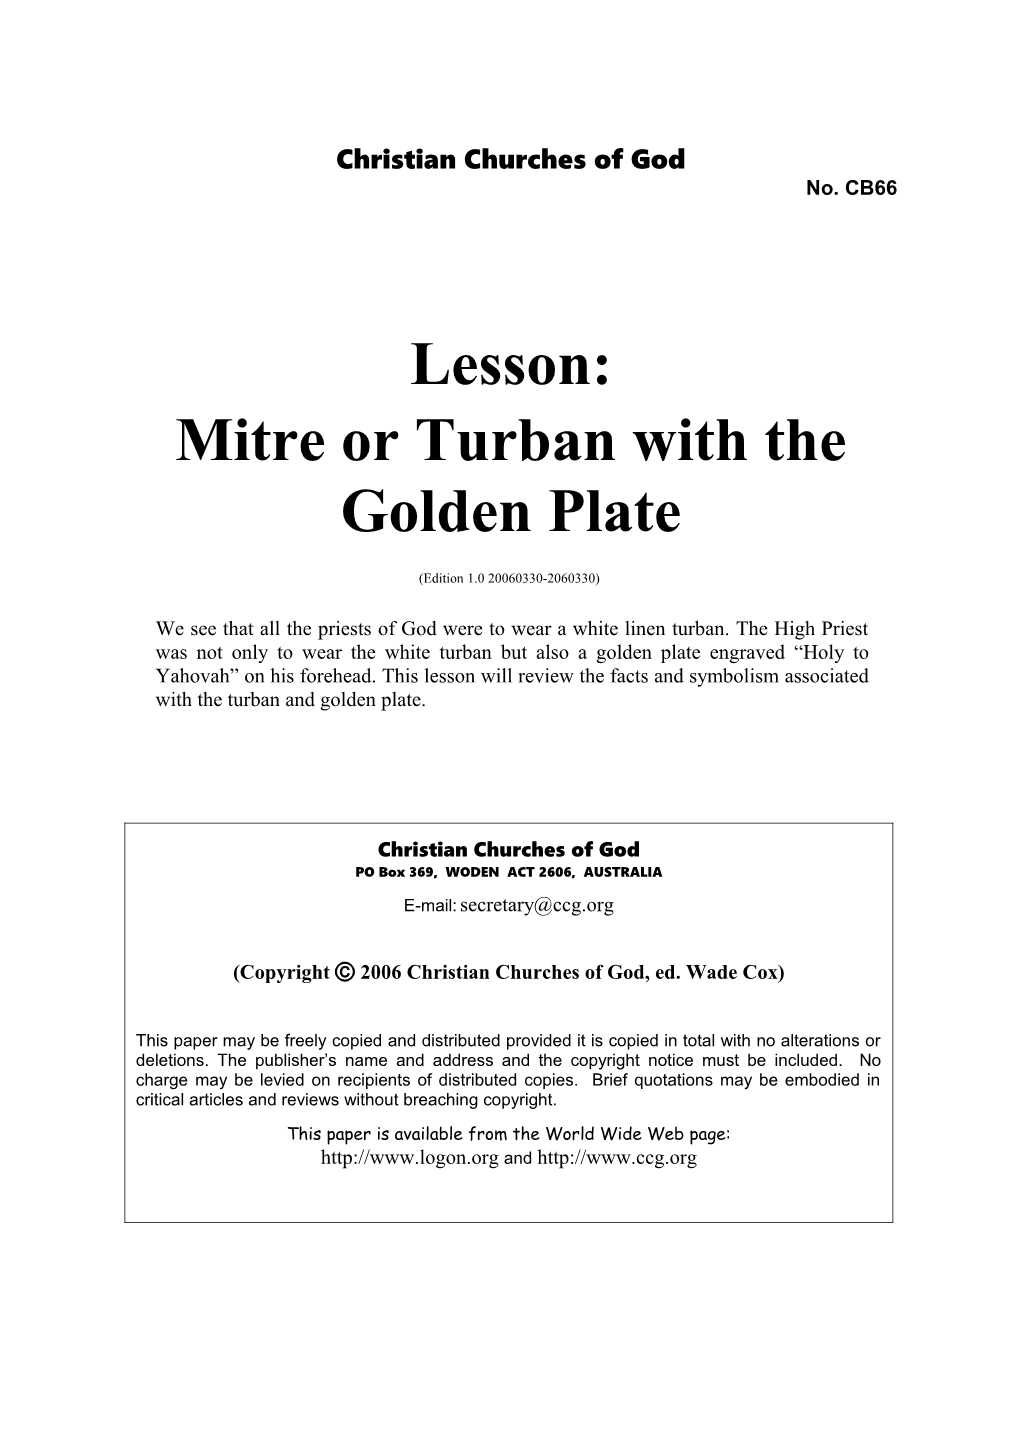 Lesson: Mitre Or Turban with the Golden Plate (No. CB66)